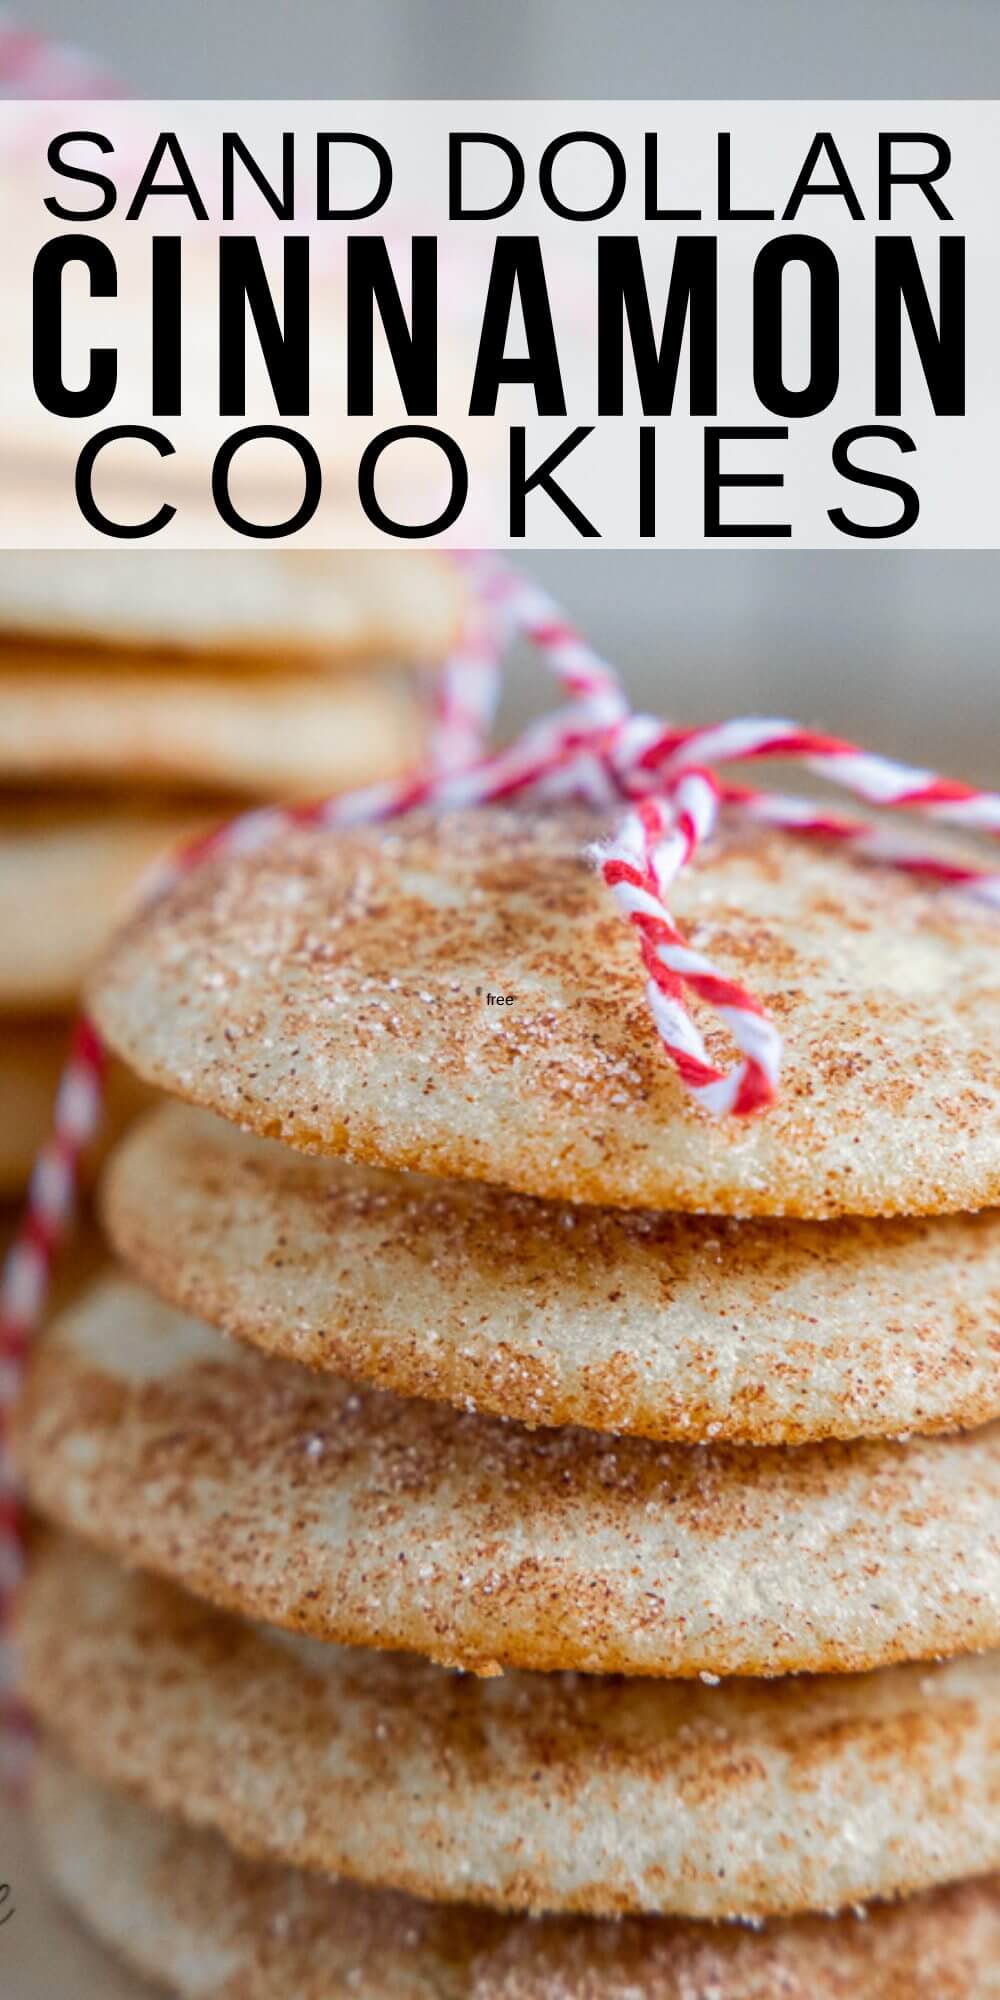 Make these amazing light and fluffy cinnamon cookies! They are different than snickerdoodle, and they are so tender and fluffy.  They are easy to make and taste even better the next day!